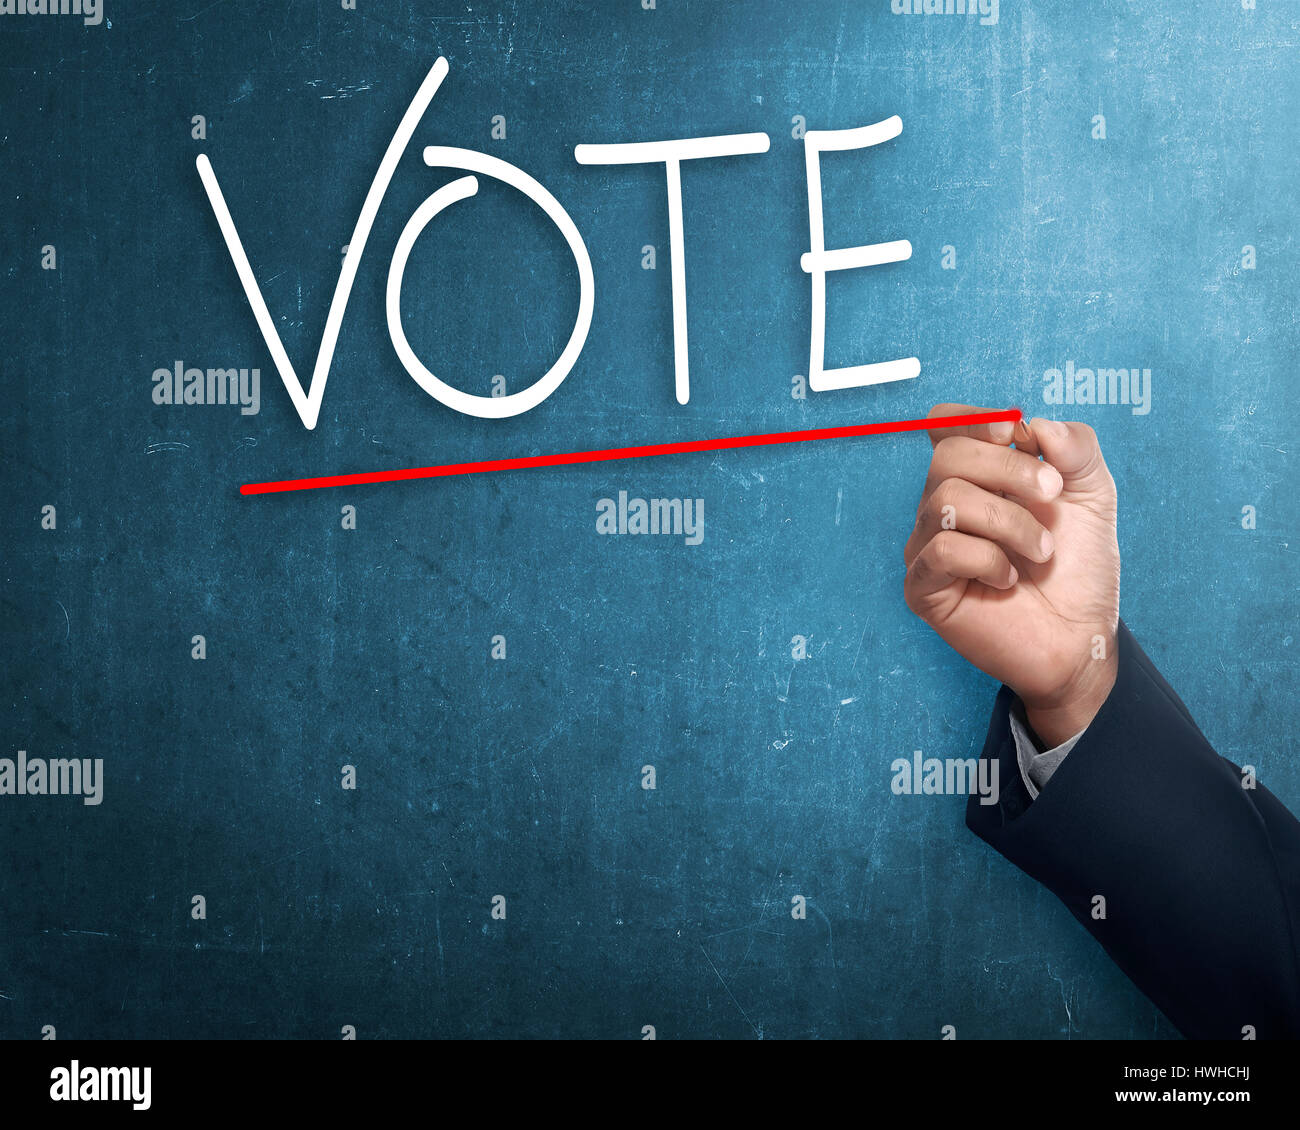 Handwriting Vote with red underline. Election day background or concept Stock Photo